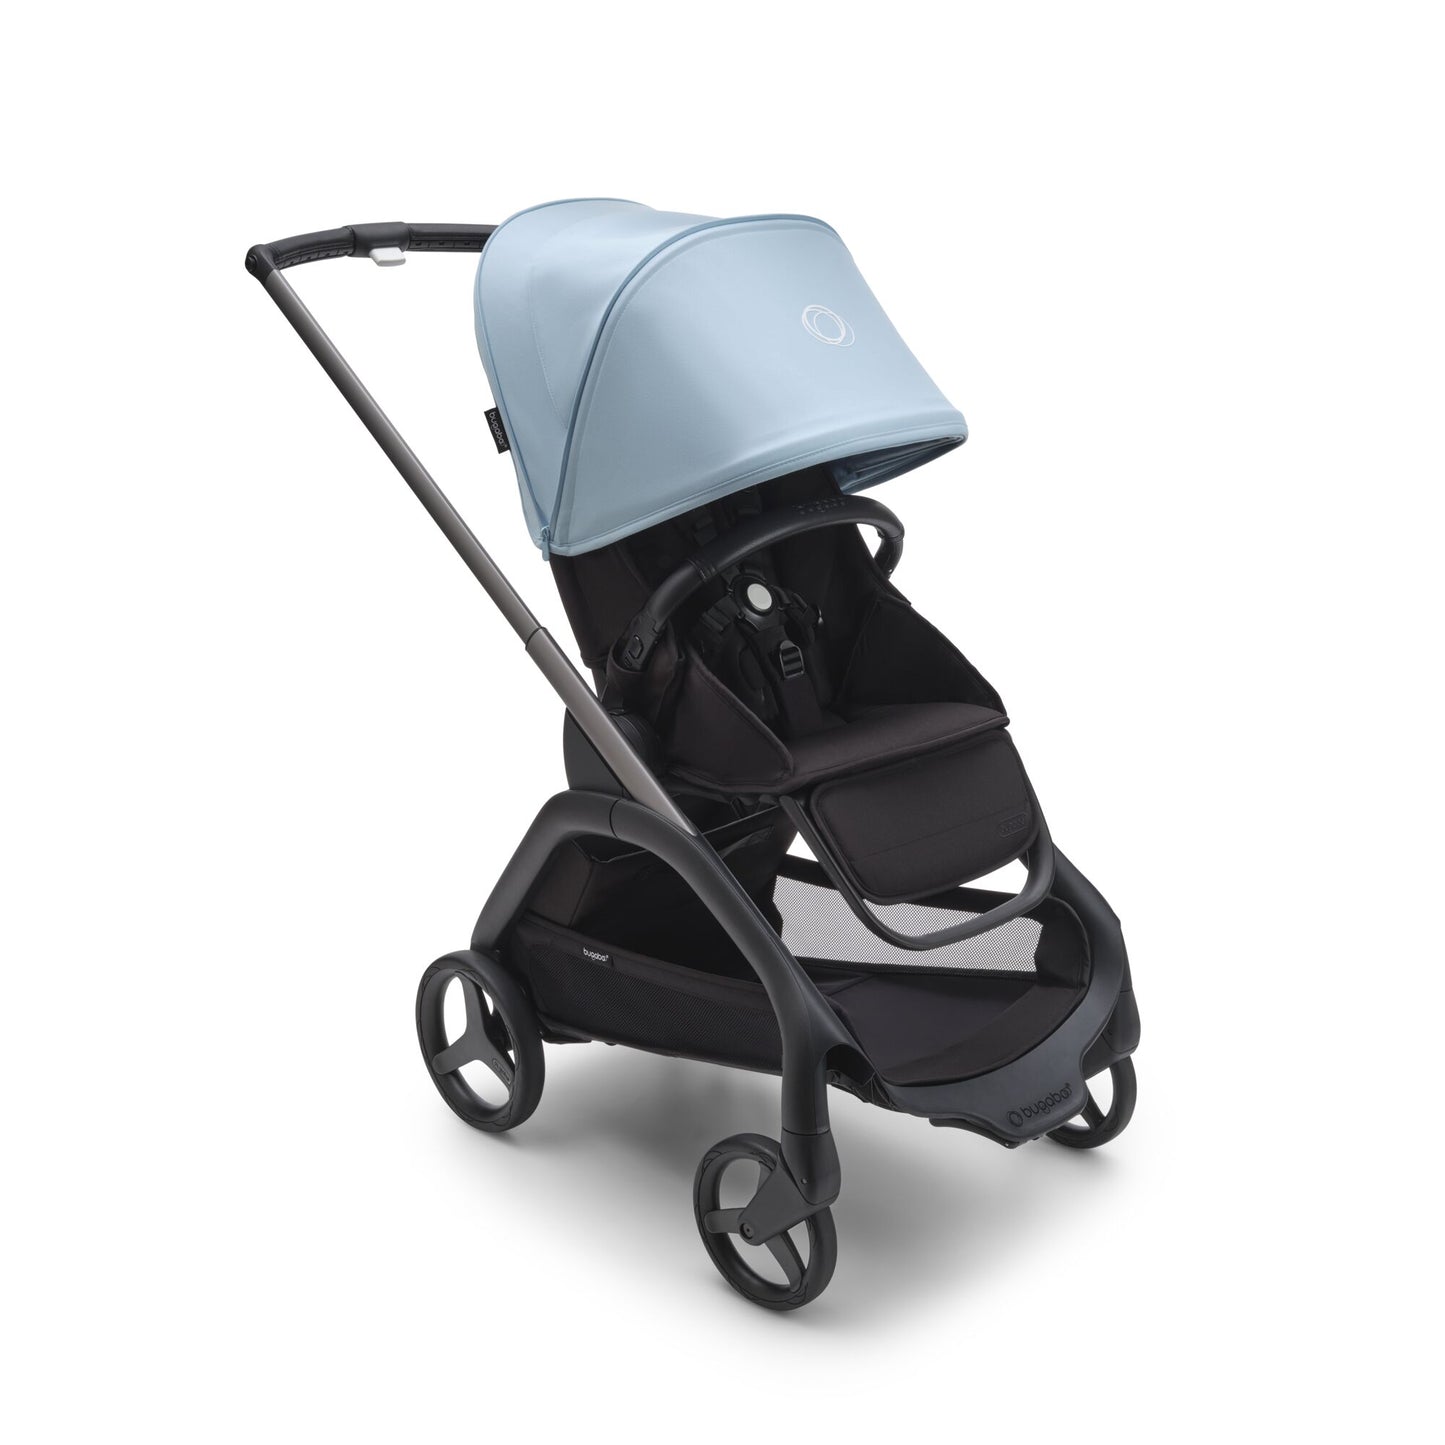 Bugaboo Dragonfly Sun Canopy - Skyline Blue on Bugaboo Dragonfly stroller with shade partially extended